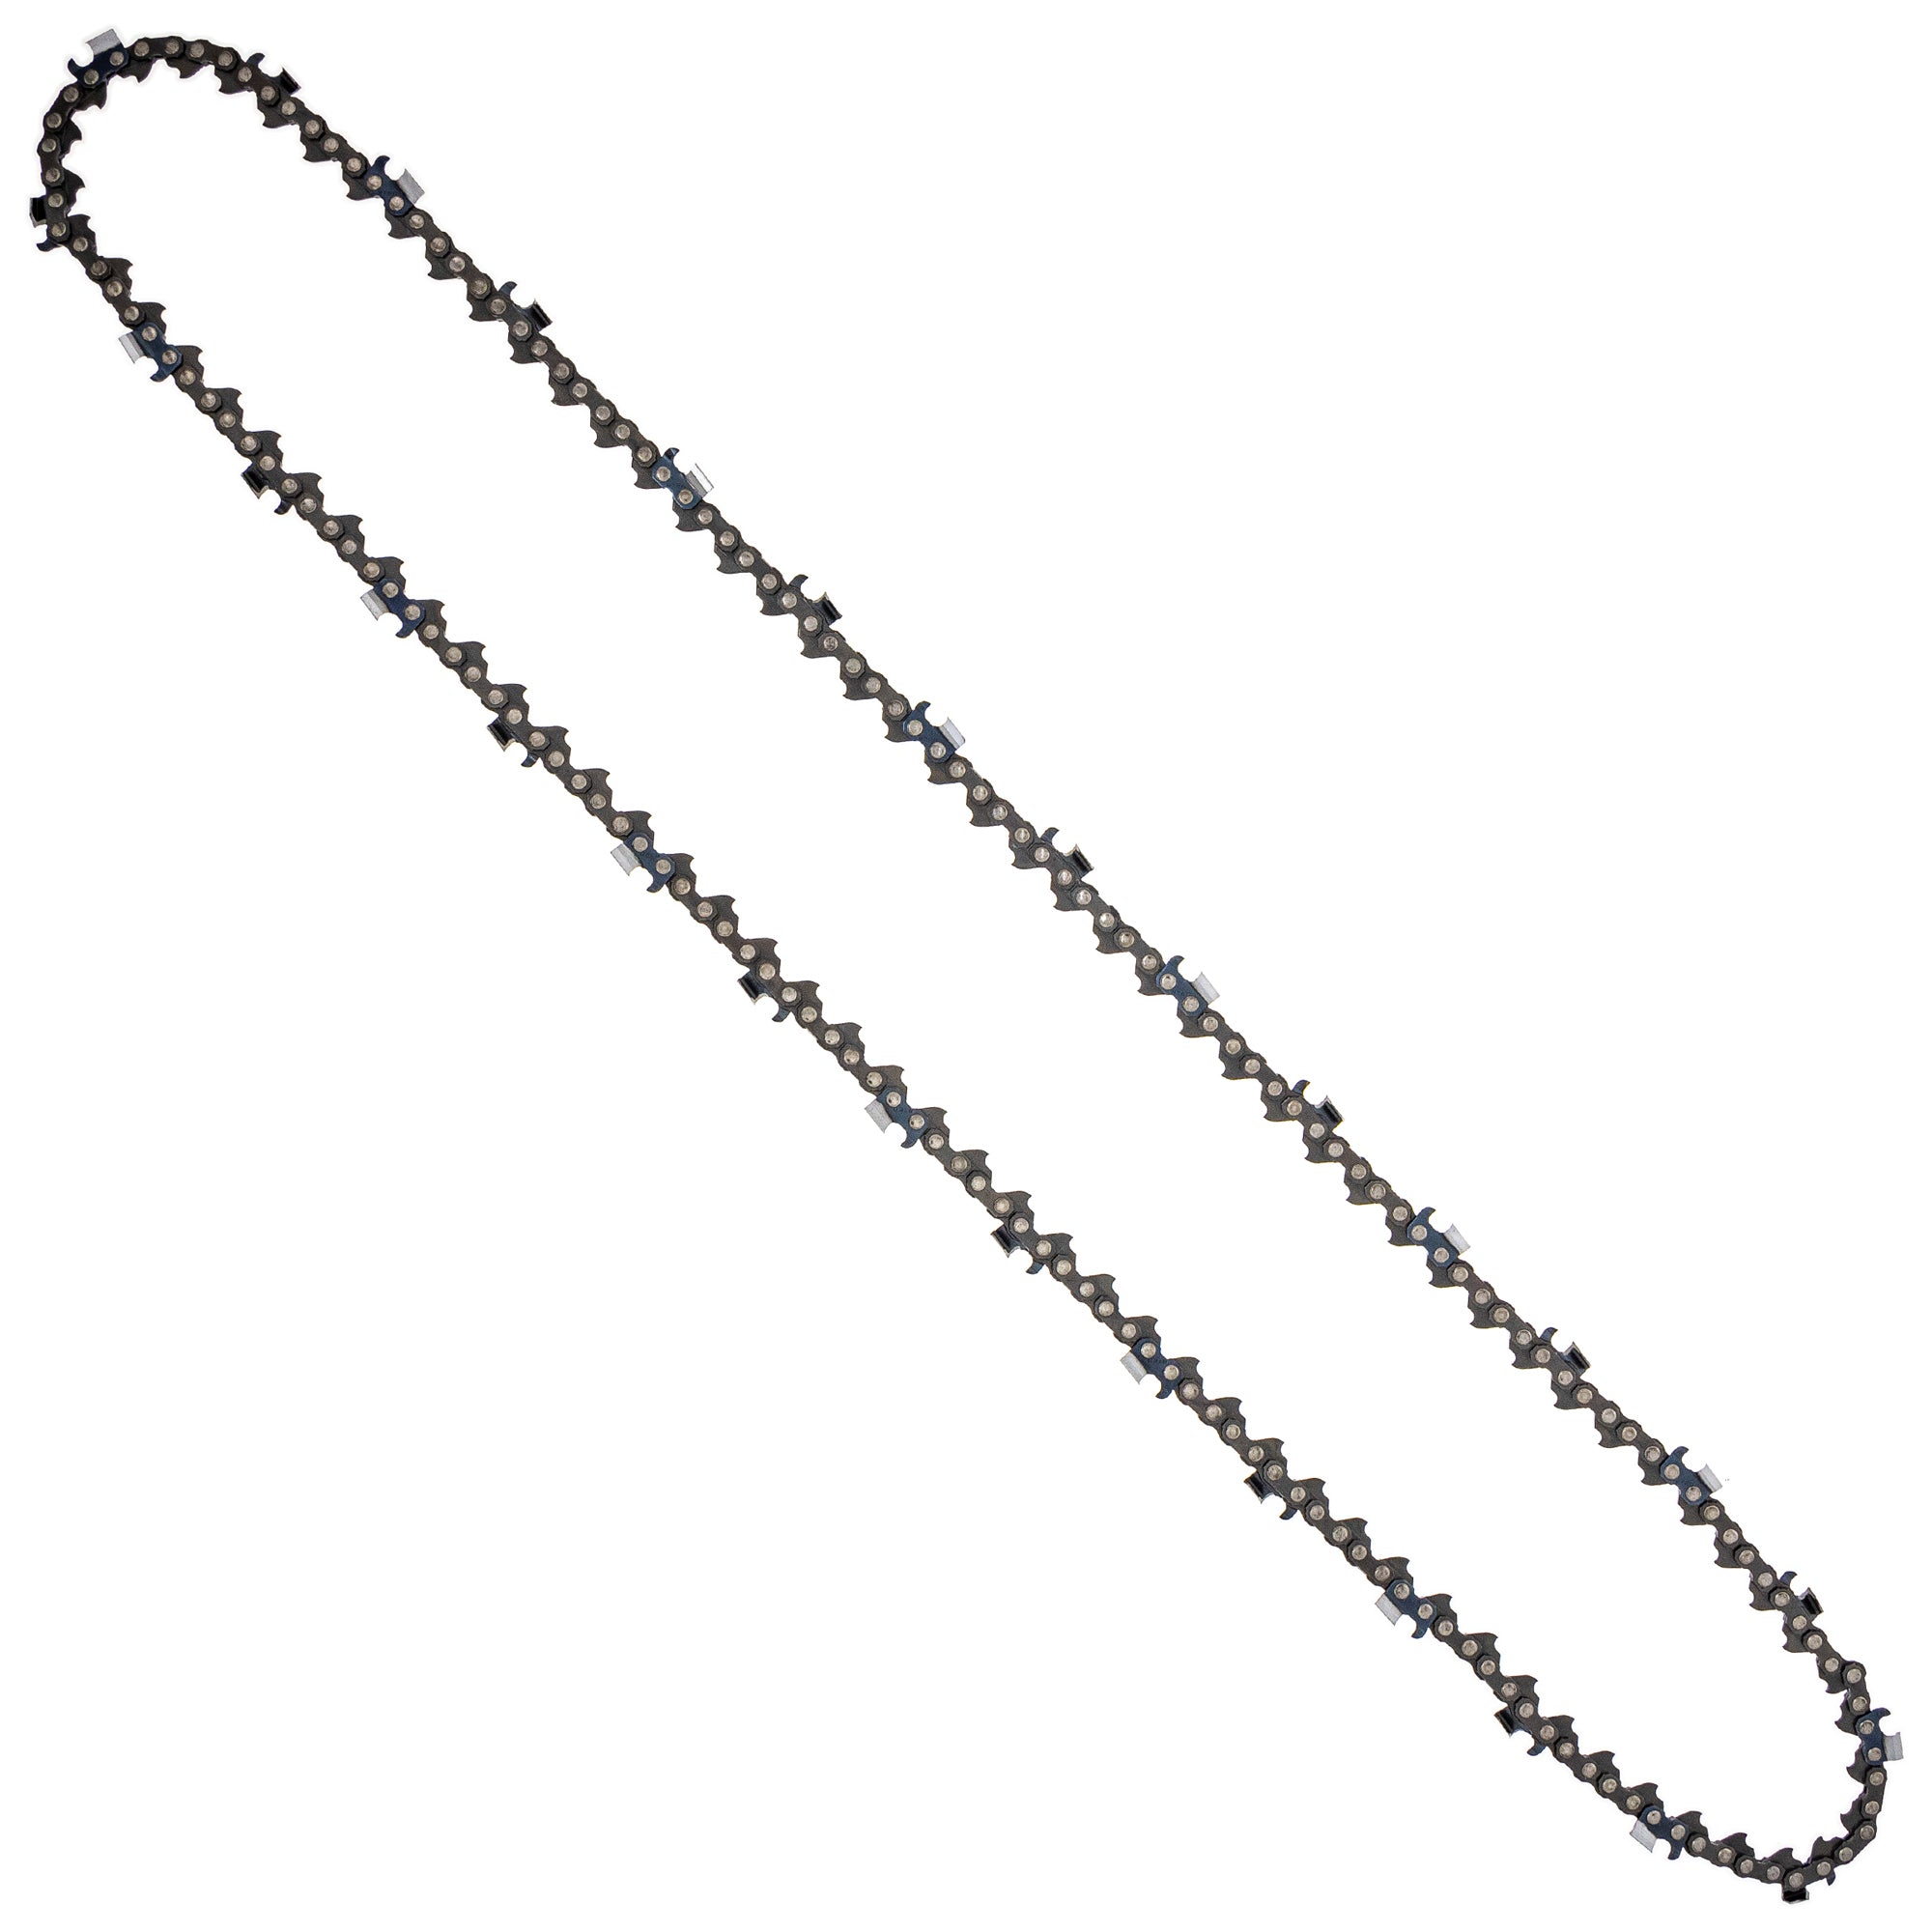 8TEN 810-CCC2207H Chain 5-Pack for zOTHER Oregon MS 066 064 056